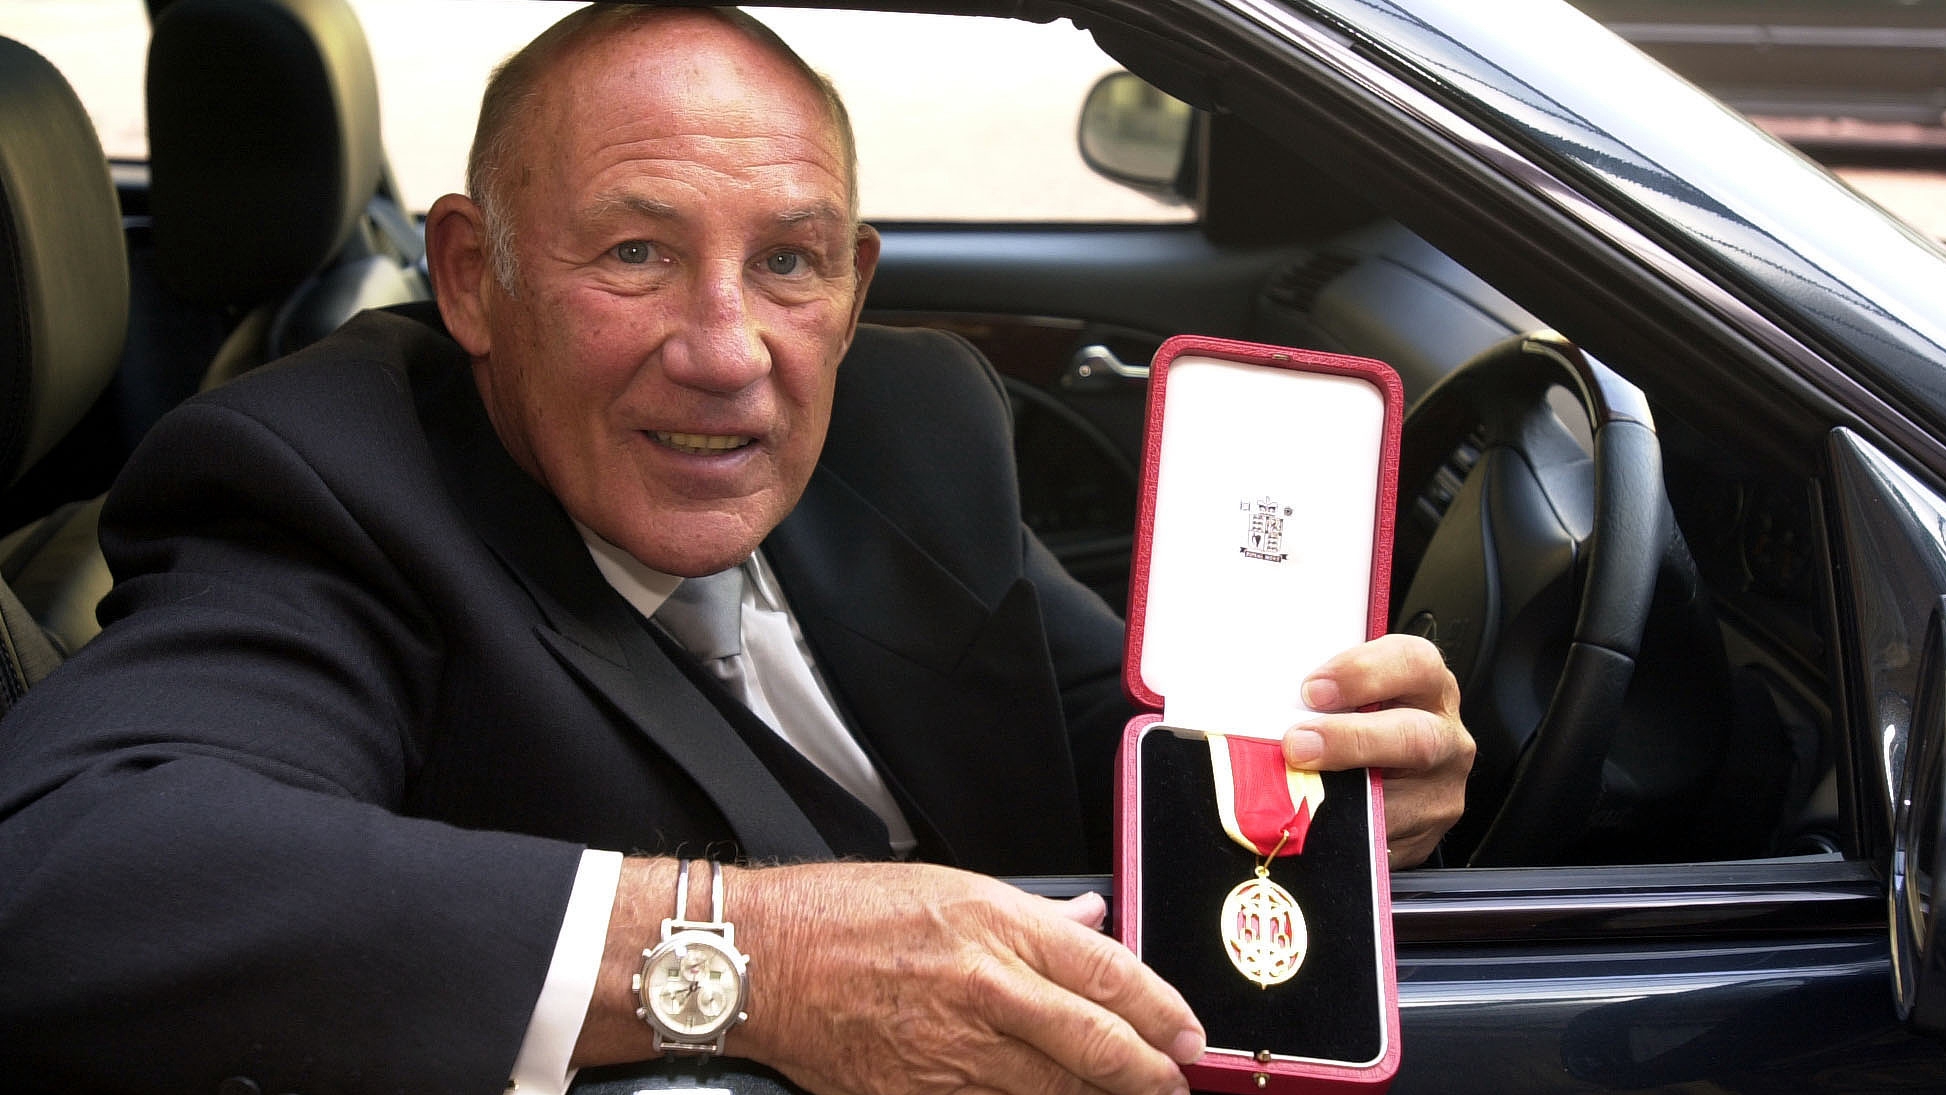 Sir Stirling Moss displays his knighthood from the Prince of Wales at Buckingham Palace in London, England, March 21, 2000. /CFP